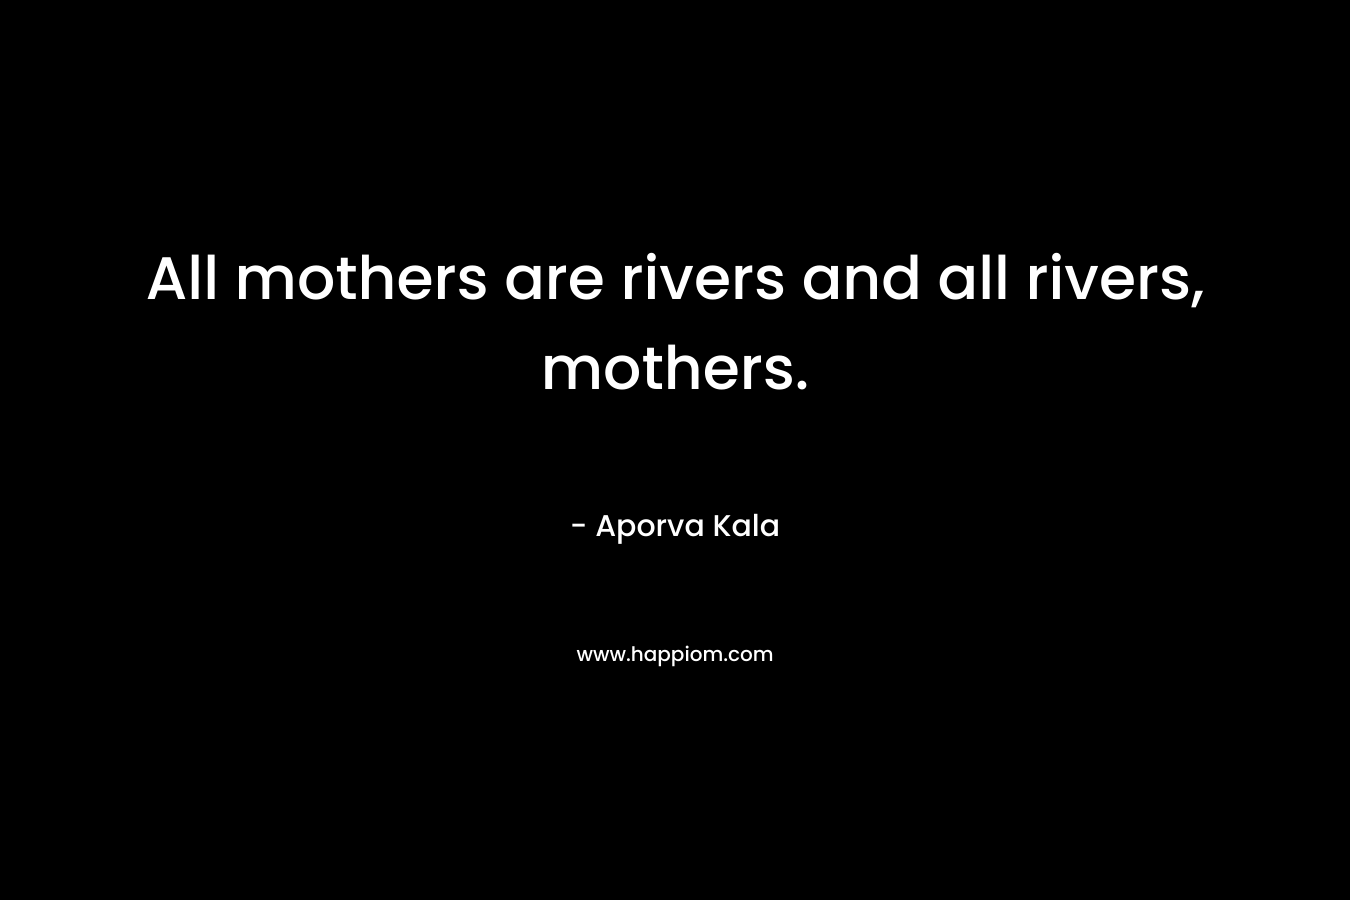 All mothers are rivers and all rivers, mothers.